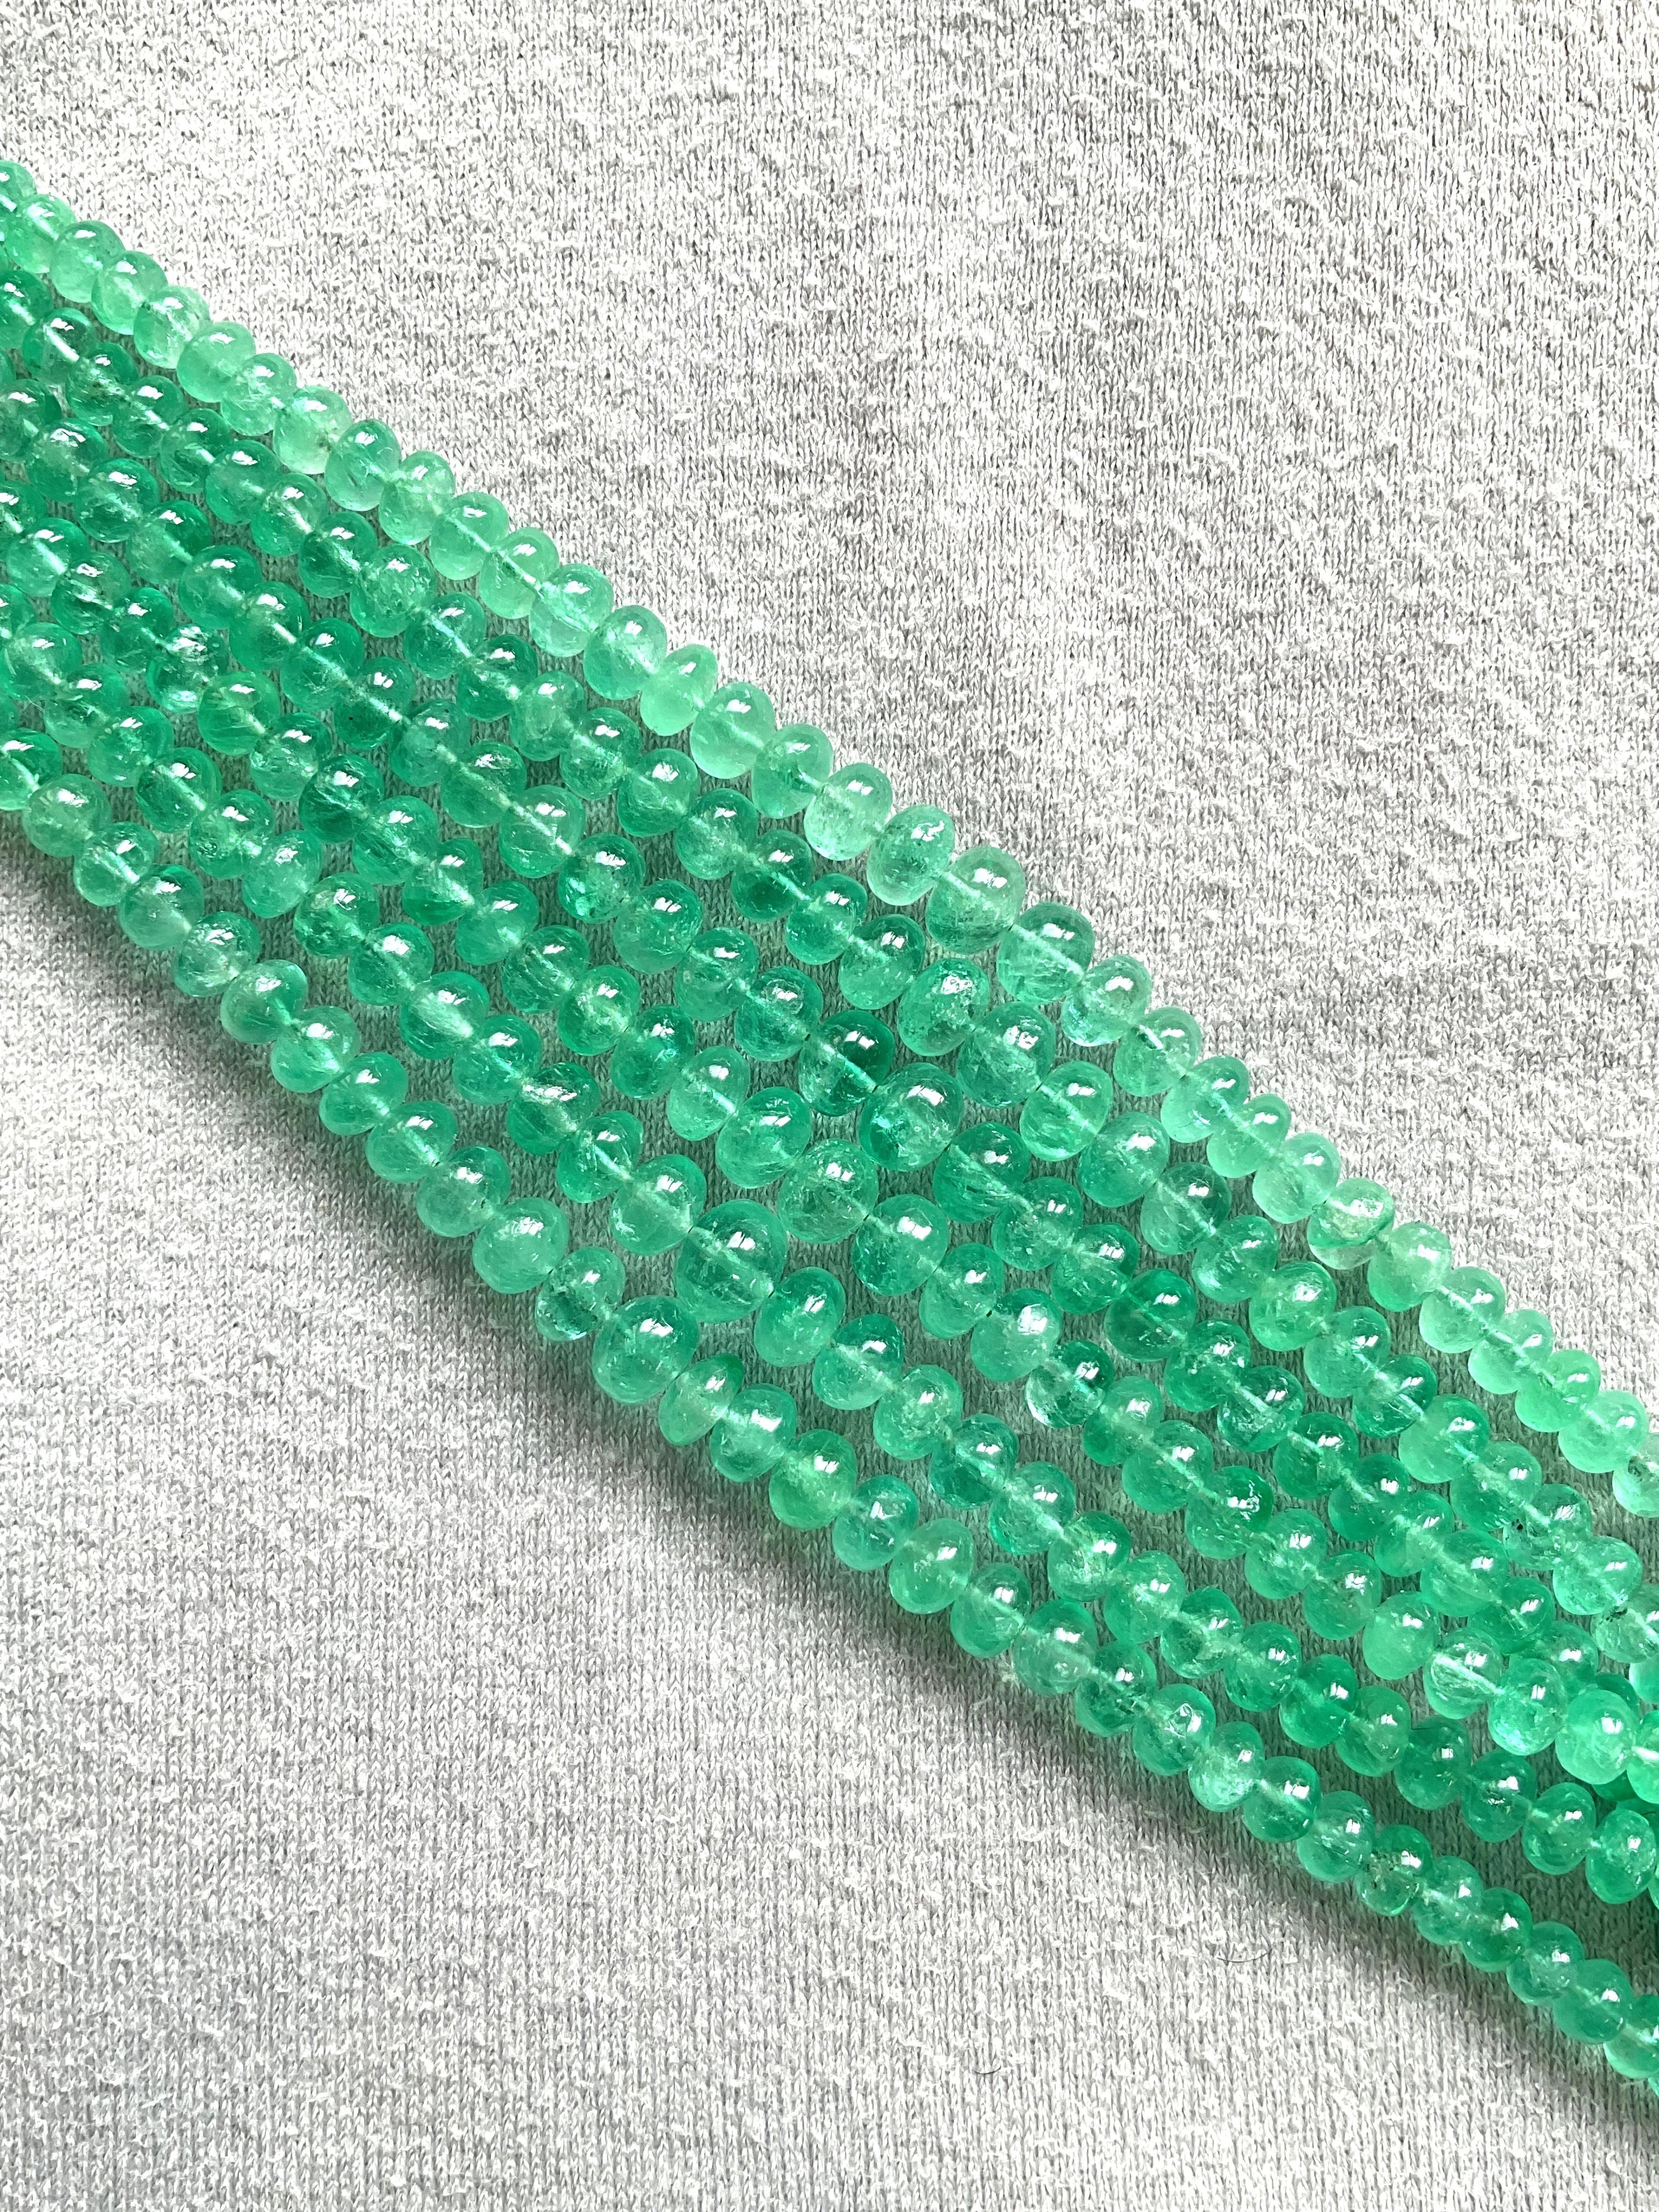 Top Quality 218.70 Carats Colombian Emerald Beads For high Jewelry Natural Gems For Sale 3